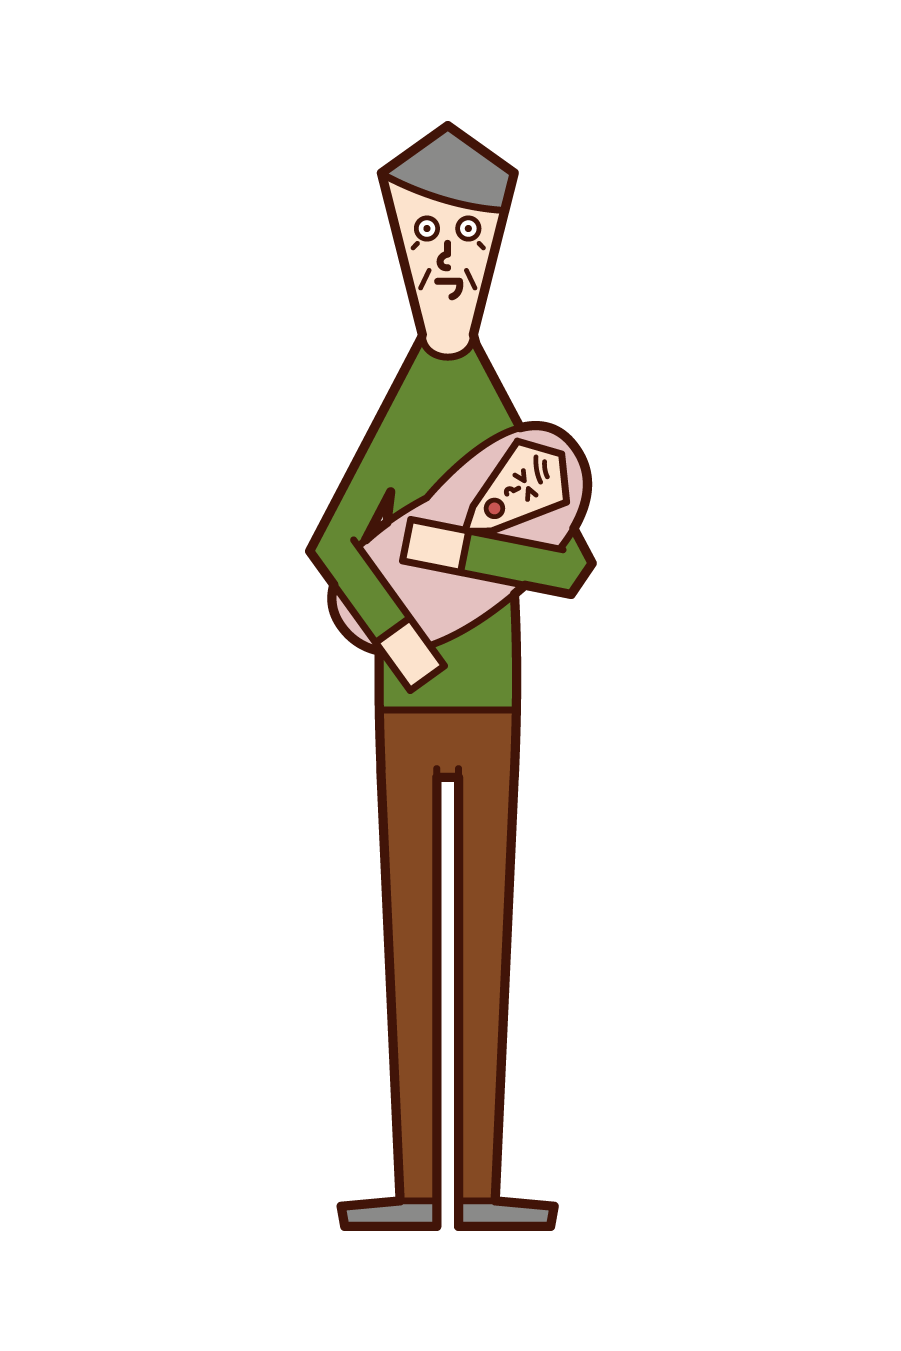 Illustration of an old father holding a grandchild